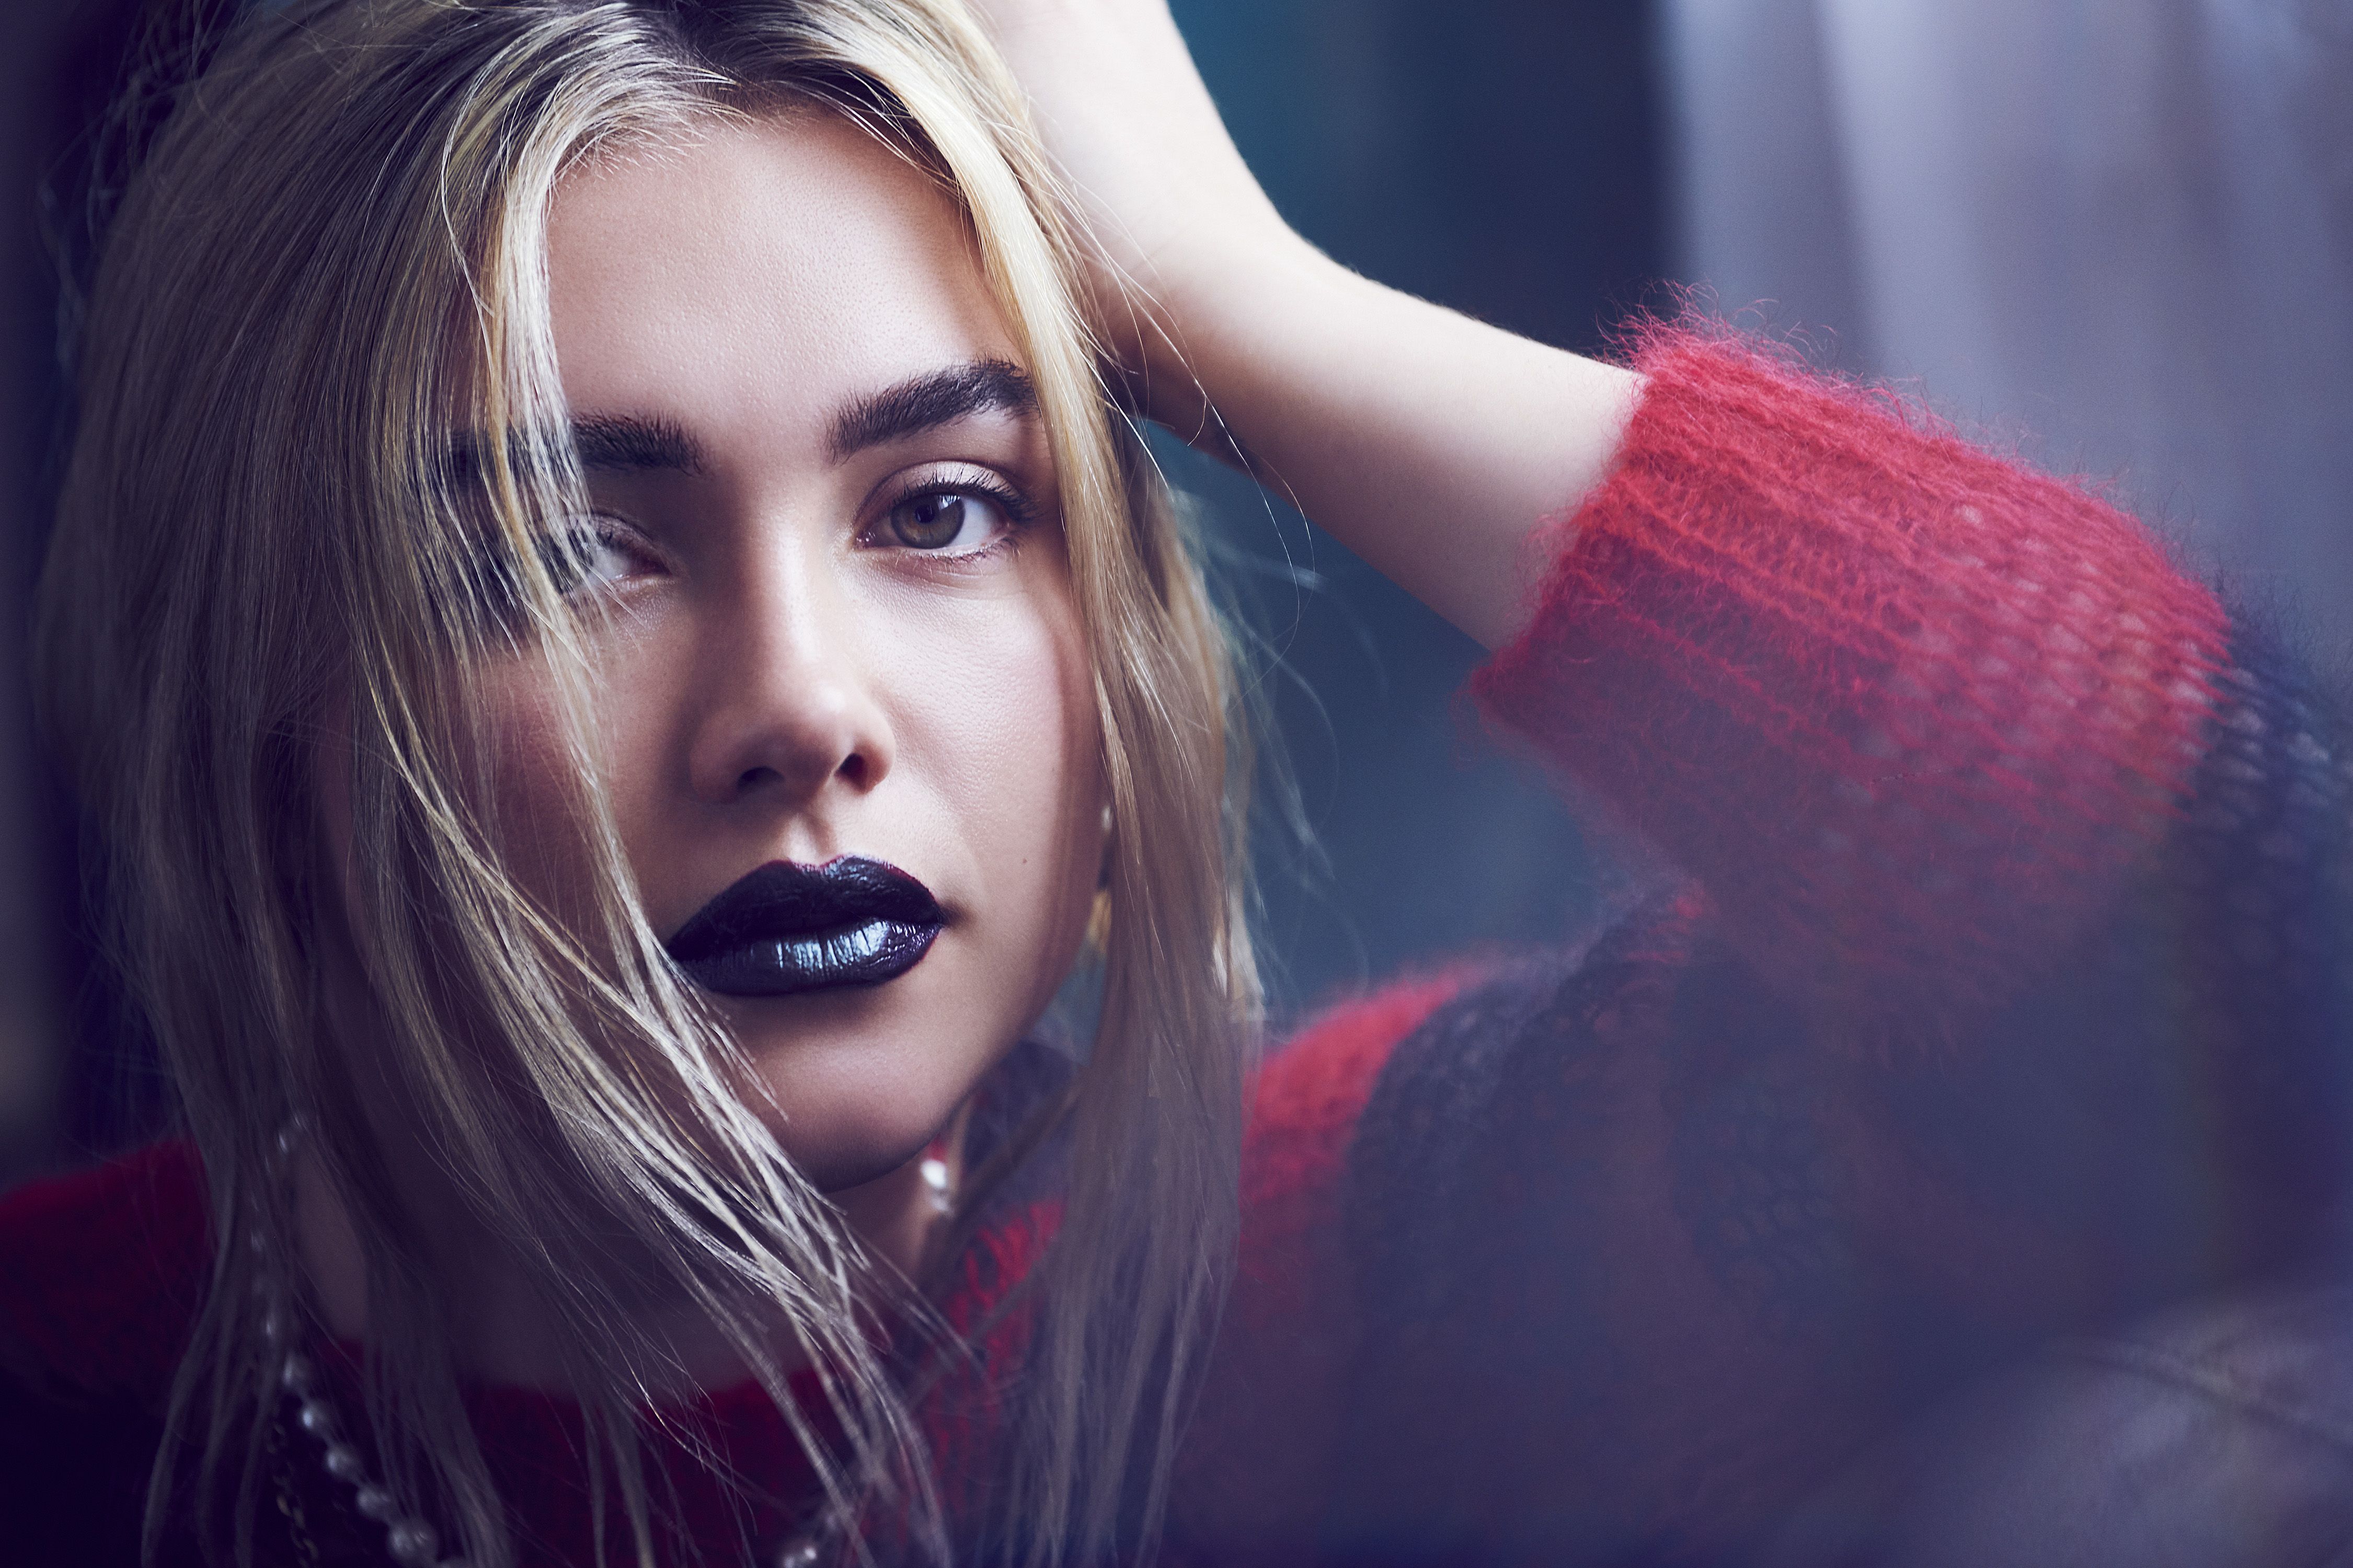 Florence Pugh Face 2020 Wallpaper, HD Celebrities 4K Wallpaper, Image and Background